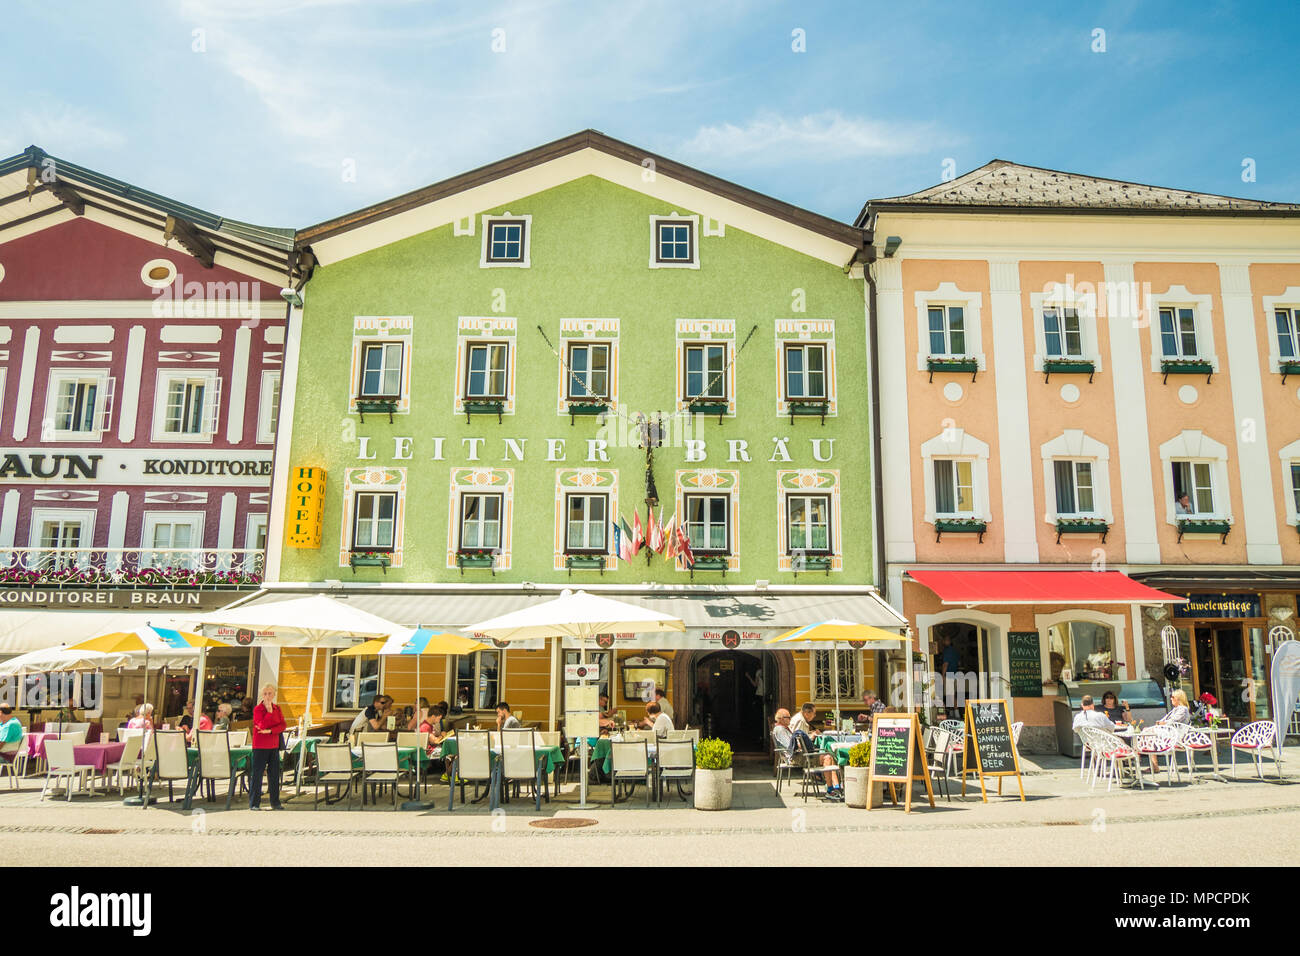 Hotel & Cafe/Restaurants in the town of Mondsee, Austria. Stock Photo